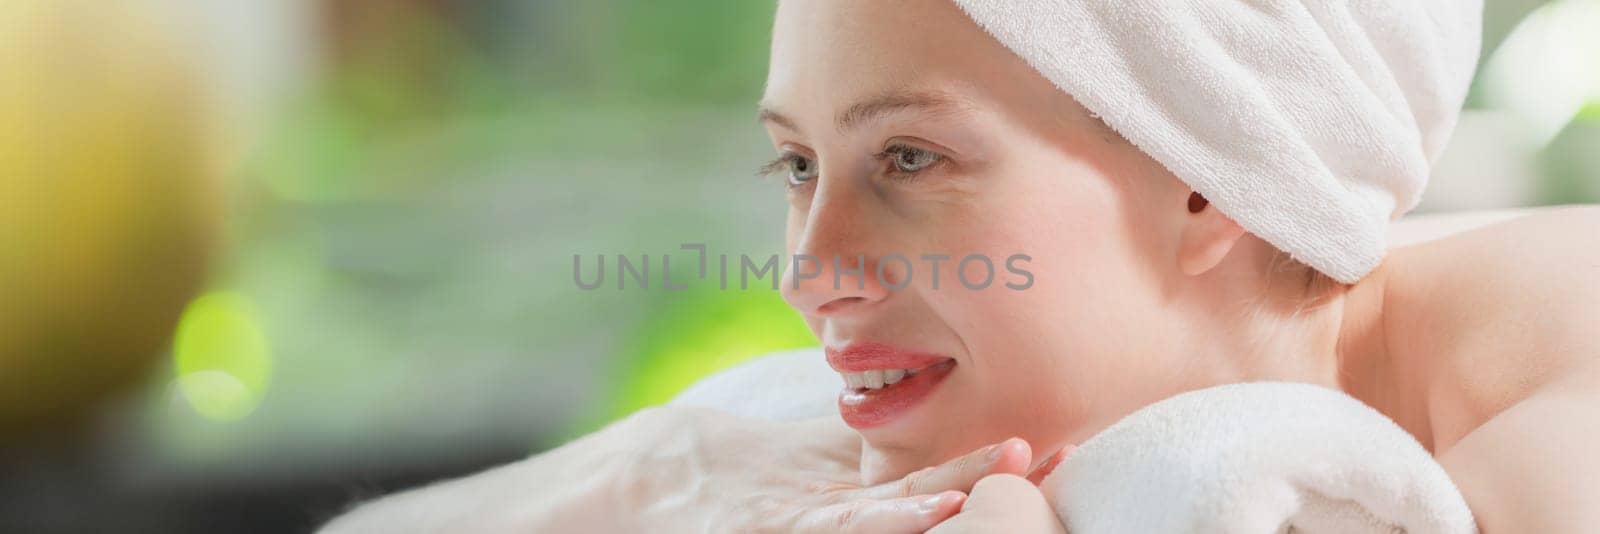 Closeup of beautiful women in white towel relaxes on spa bed surrounded by peaceful and calm nature. Young gorgeous female wearing white towel during waiting for body massage. Side view. Tranquility